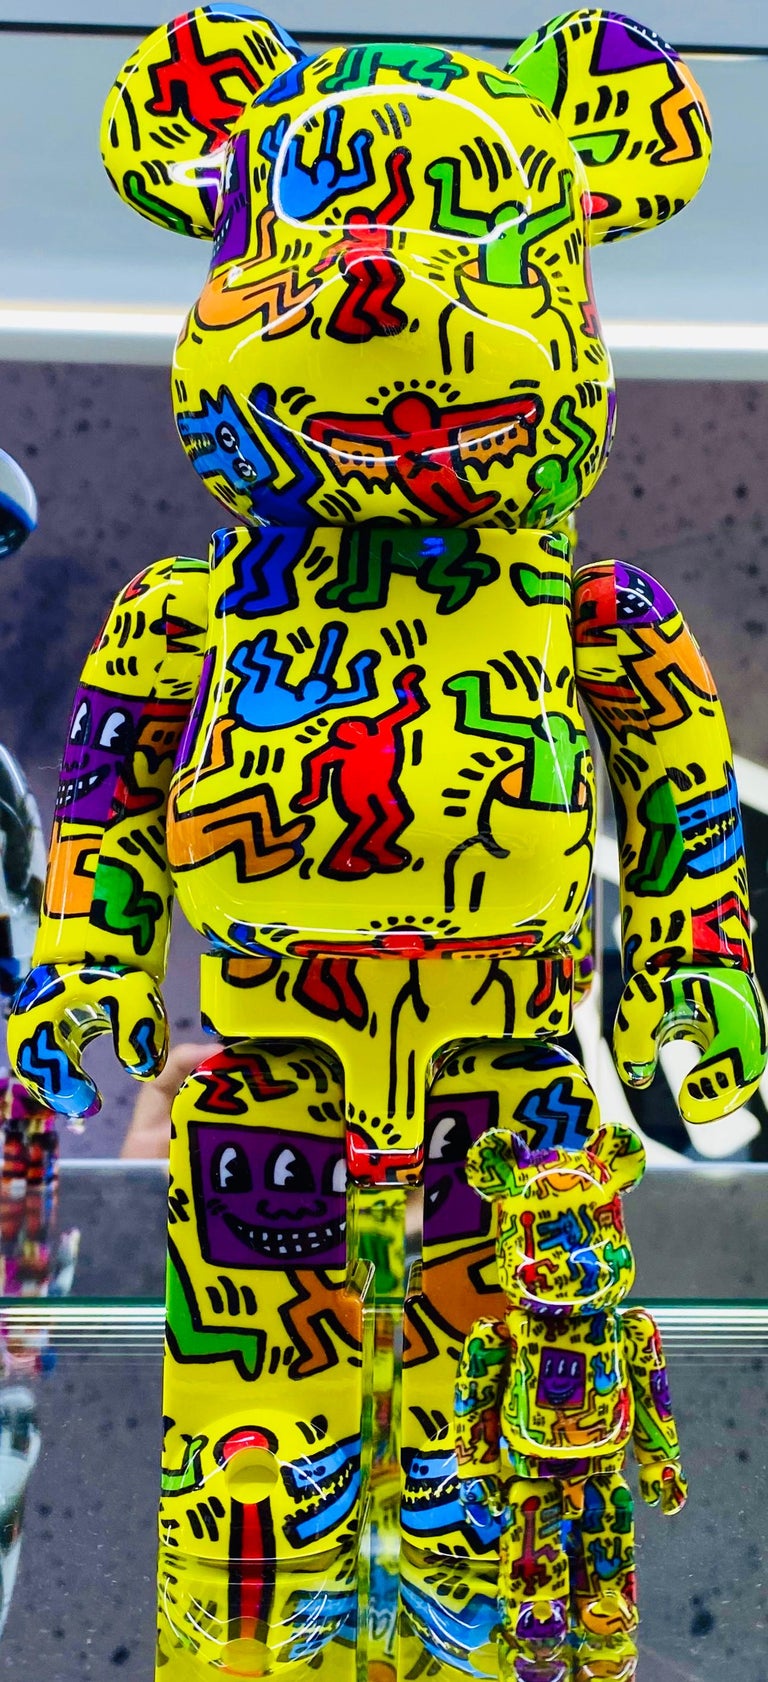 (after) Keith Haring - Keith Haring Bearbrick 400% Companion (Haring  BE@RBRICK)